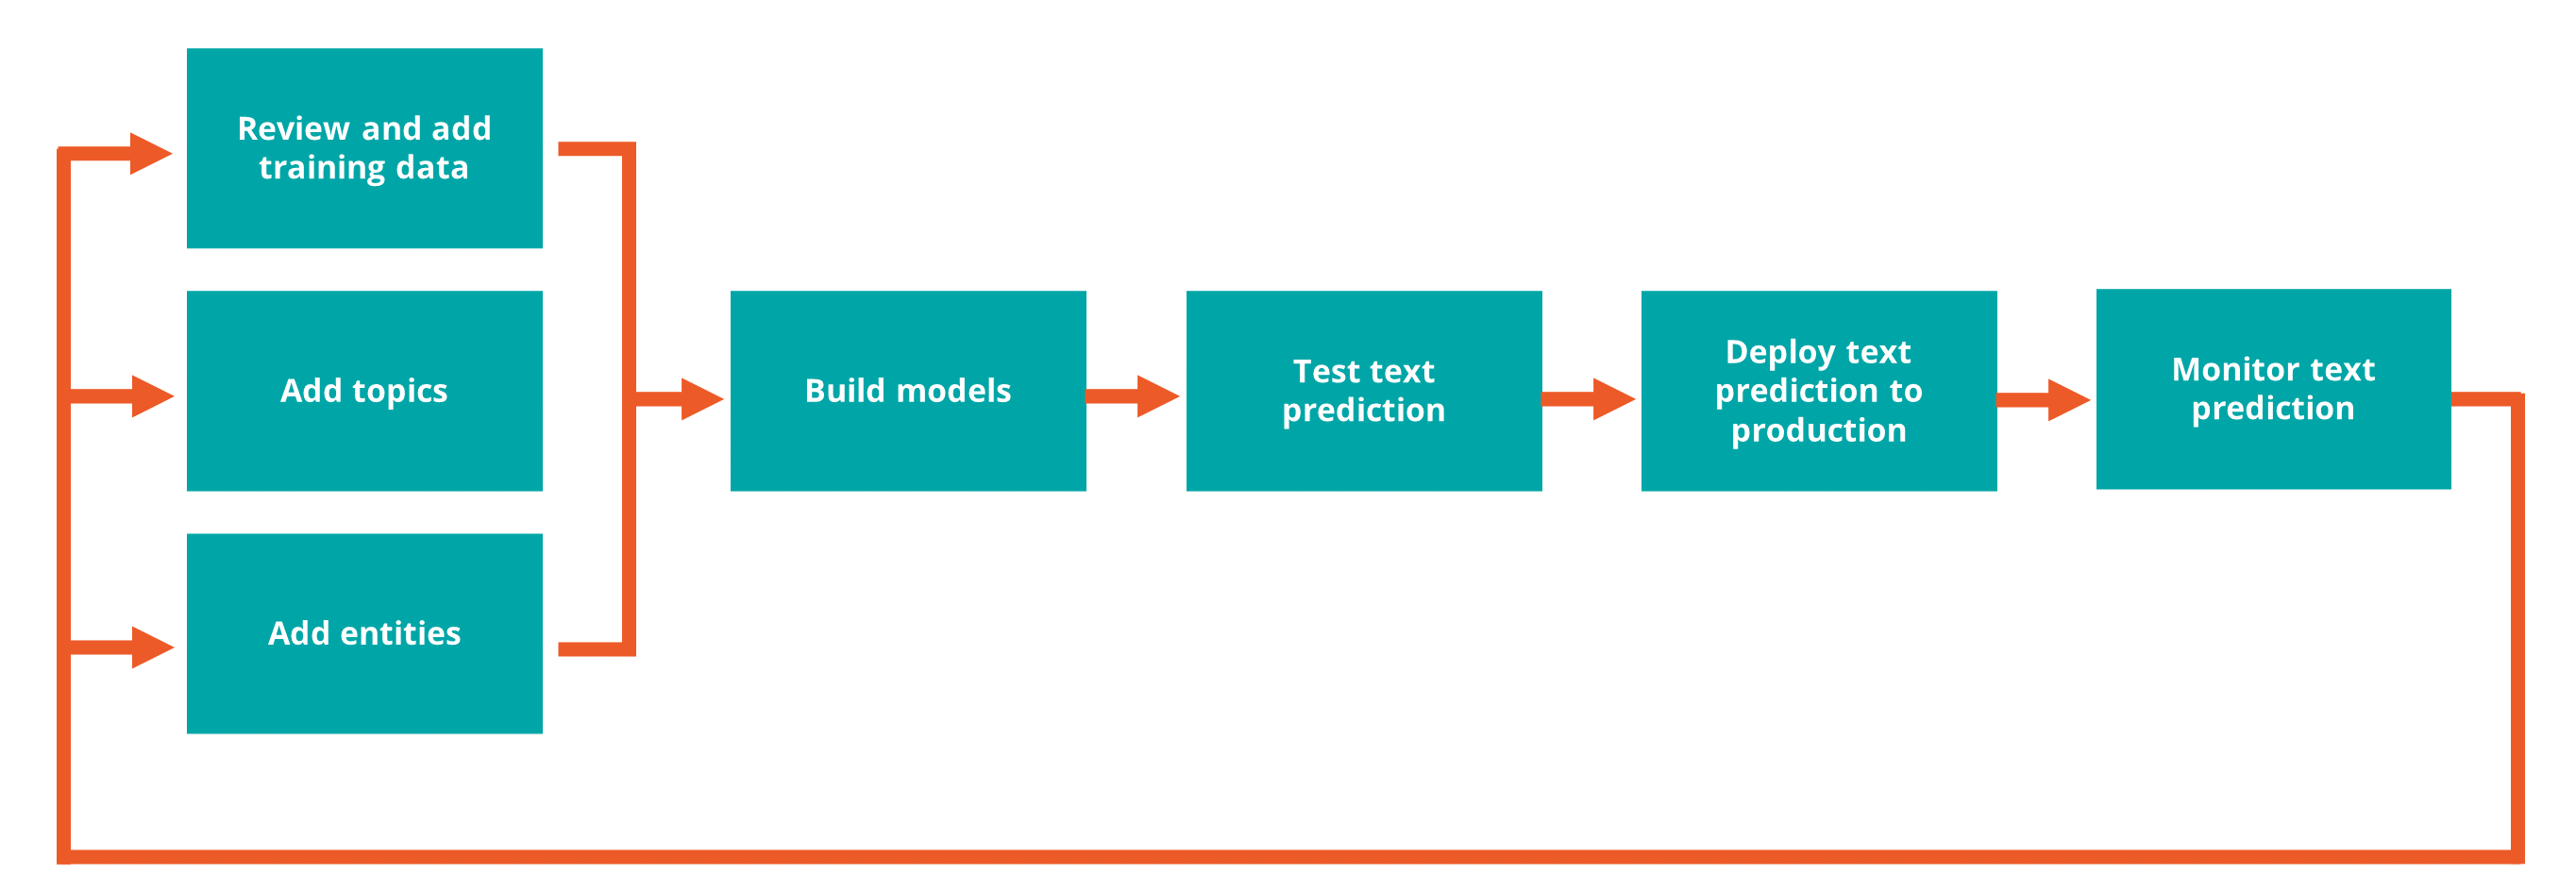 A configuration workflow for a text prediction